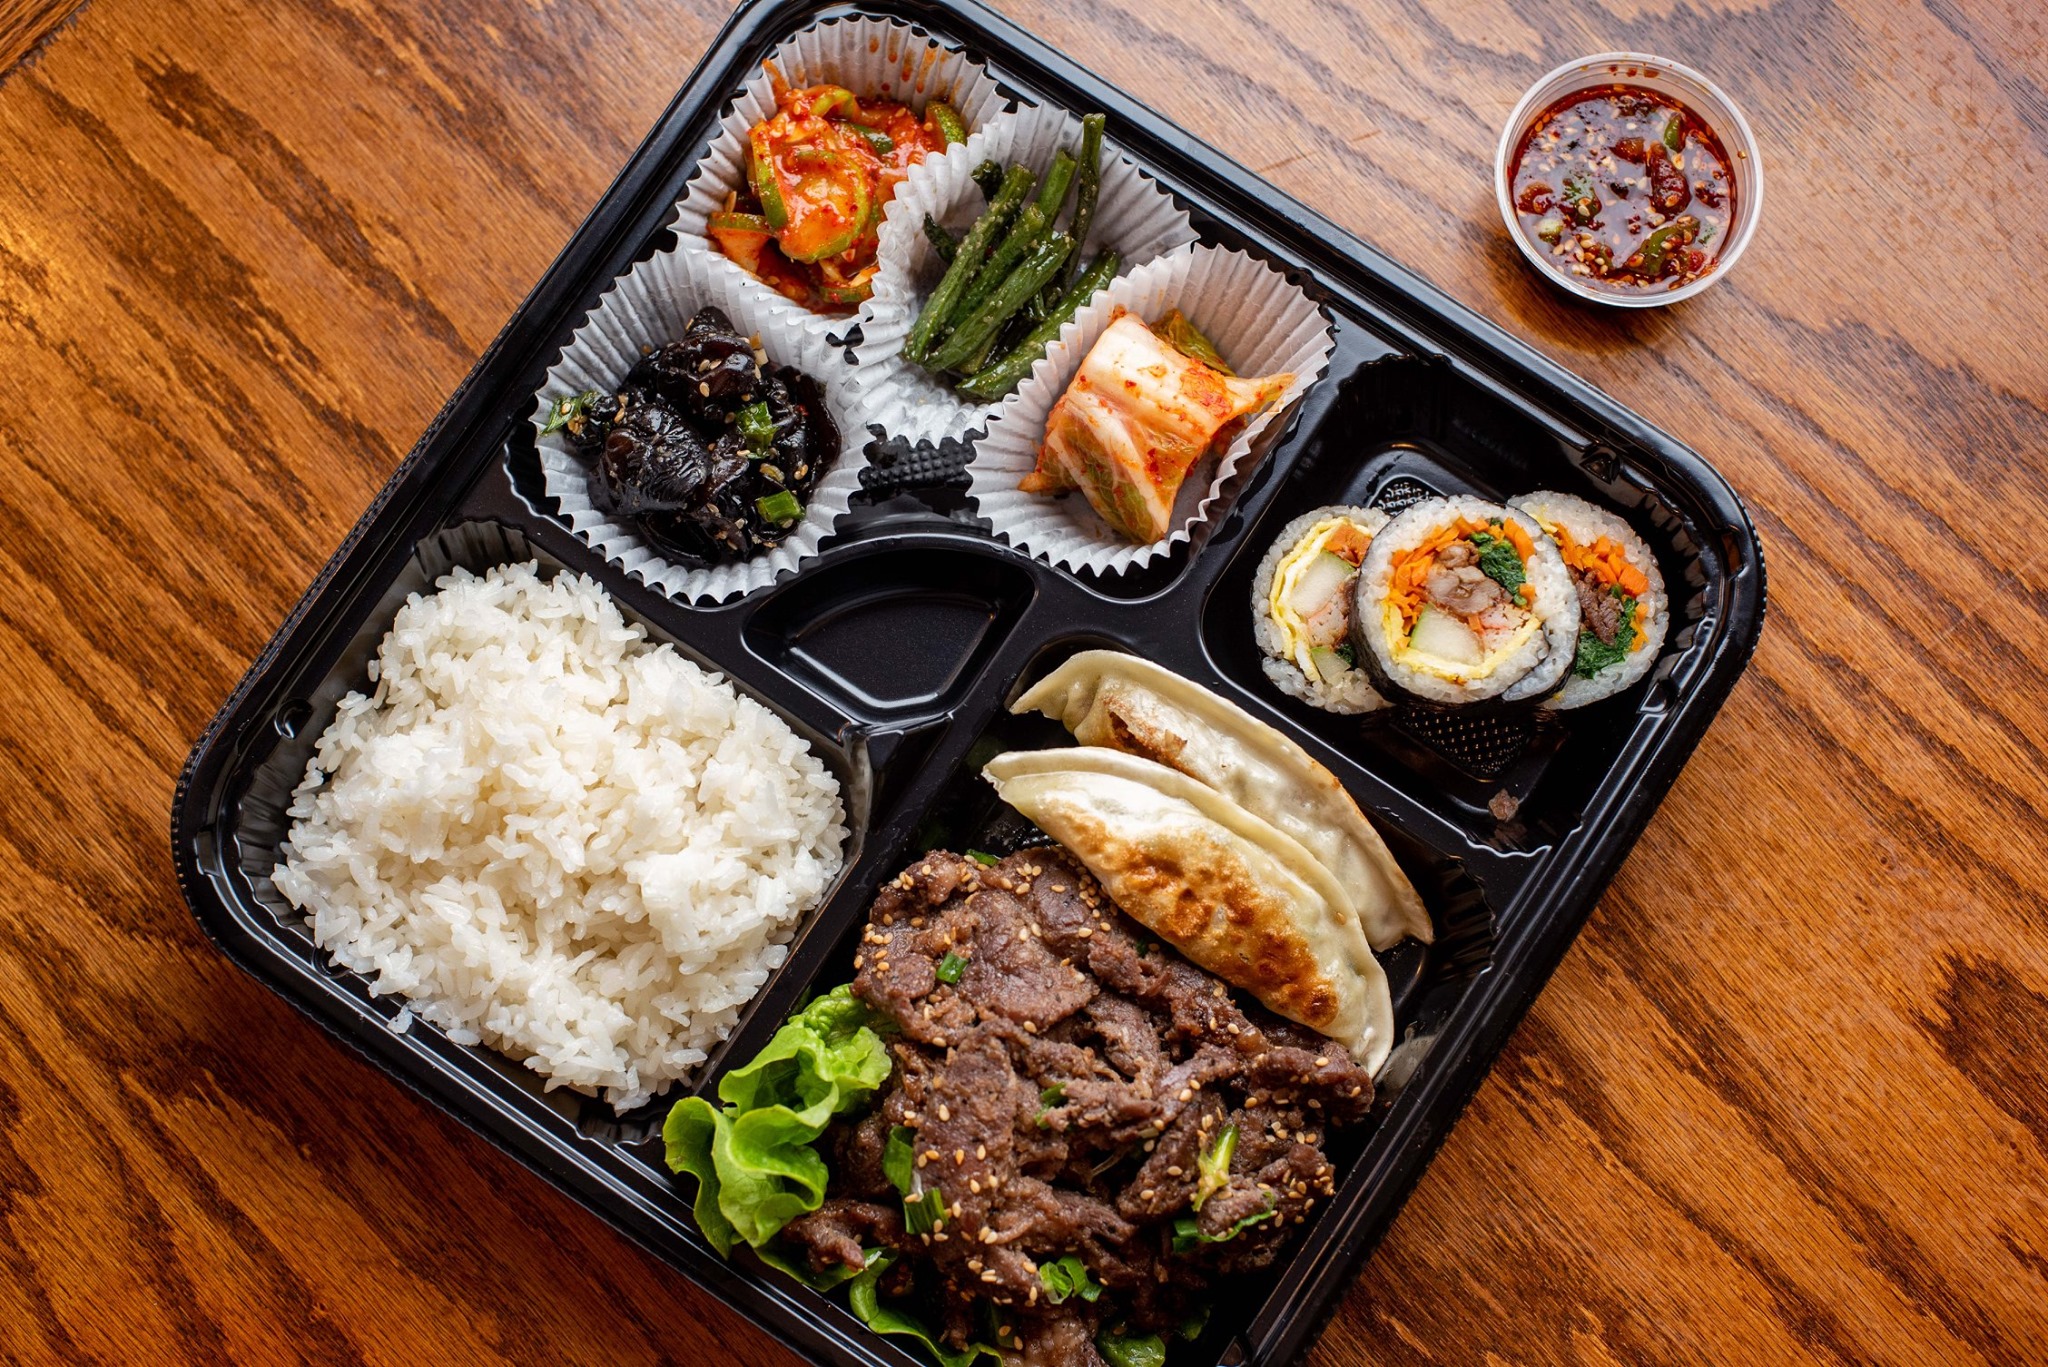 A black partitioned takeout container with white rice and beef bulgogi as main entrees alongside dumpling and banchan from Woo Nam Jeong Stone Bowl House in Doraville